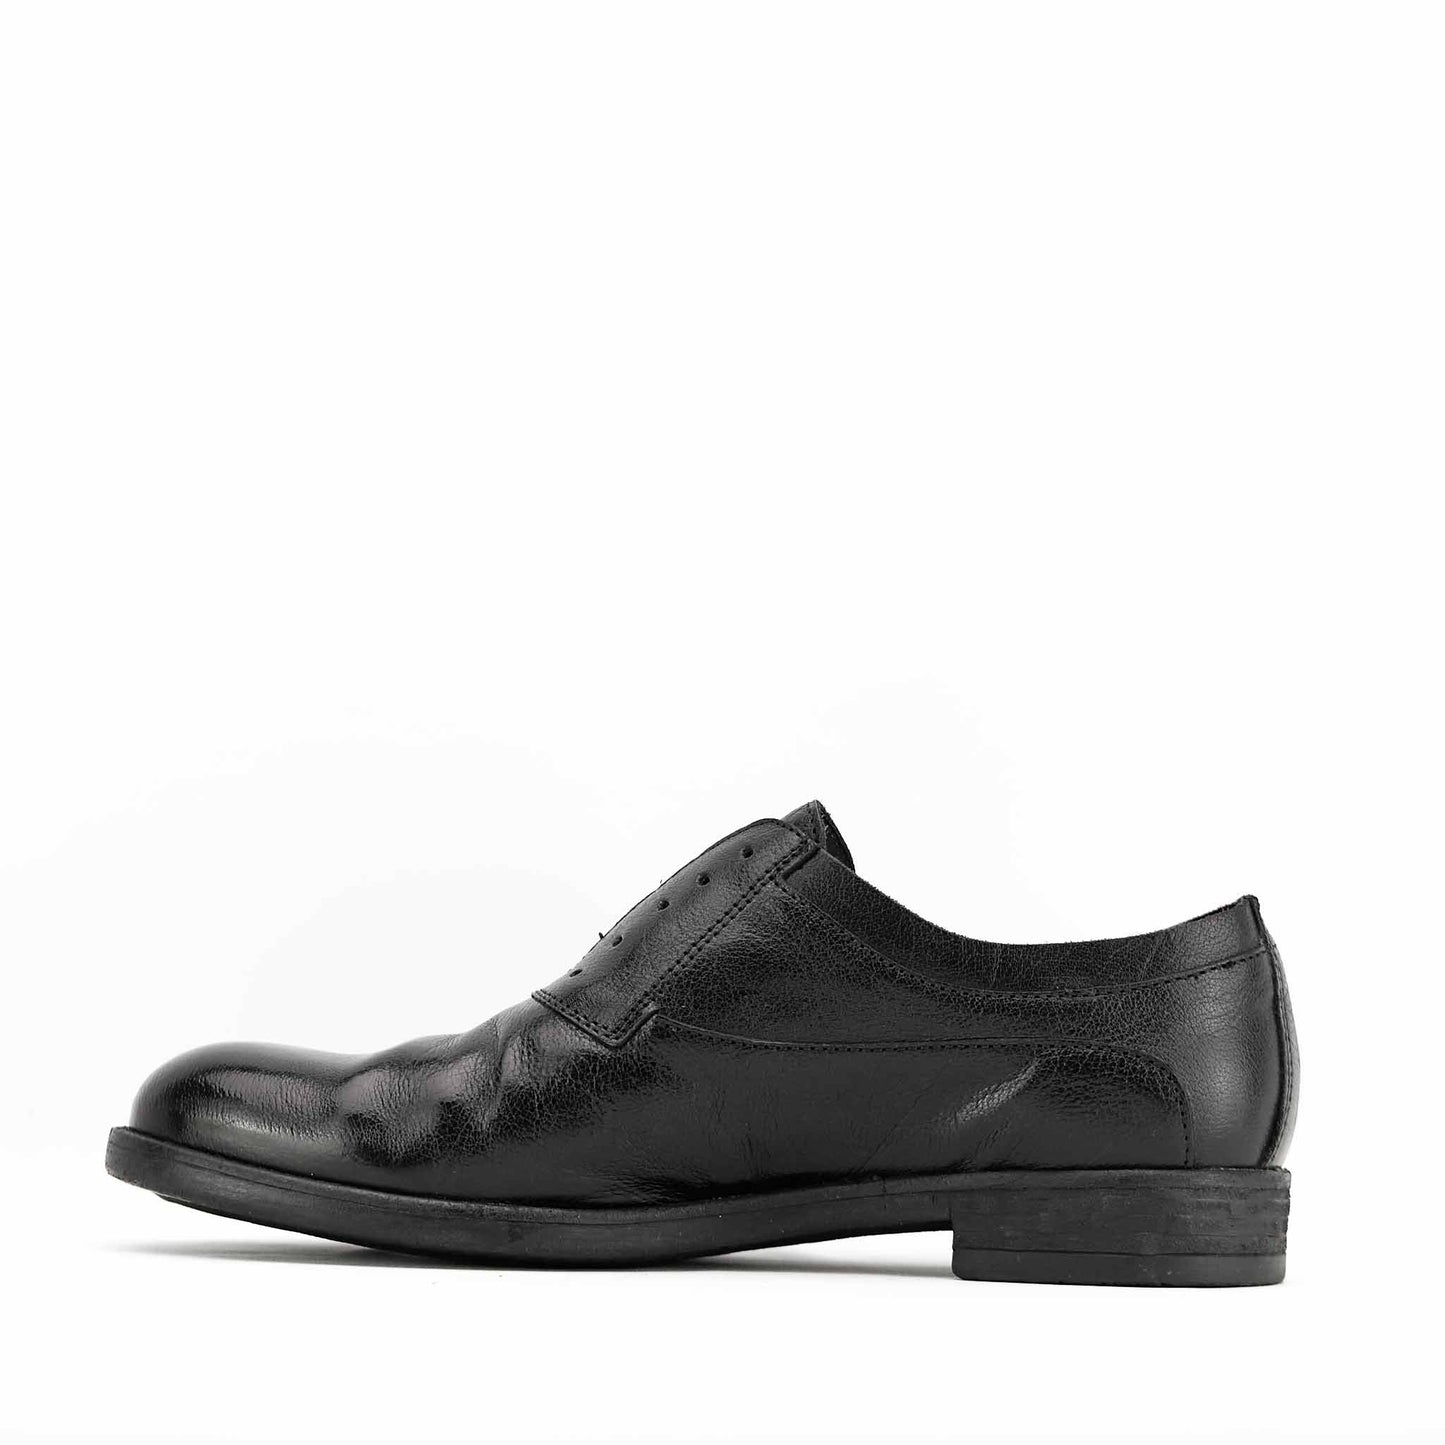 FRANK MUSTANG - Oxford No Lace Uomo - HUNDRED100® - HUNDRED100